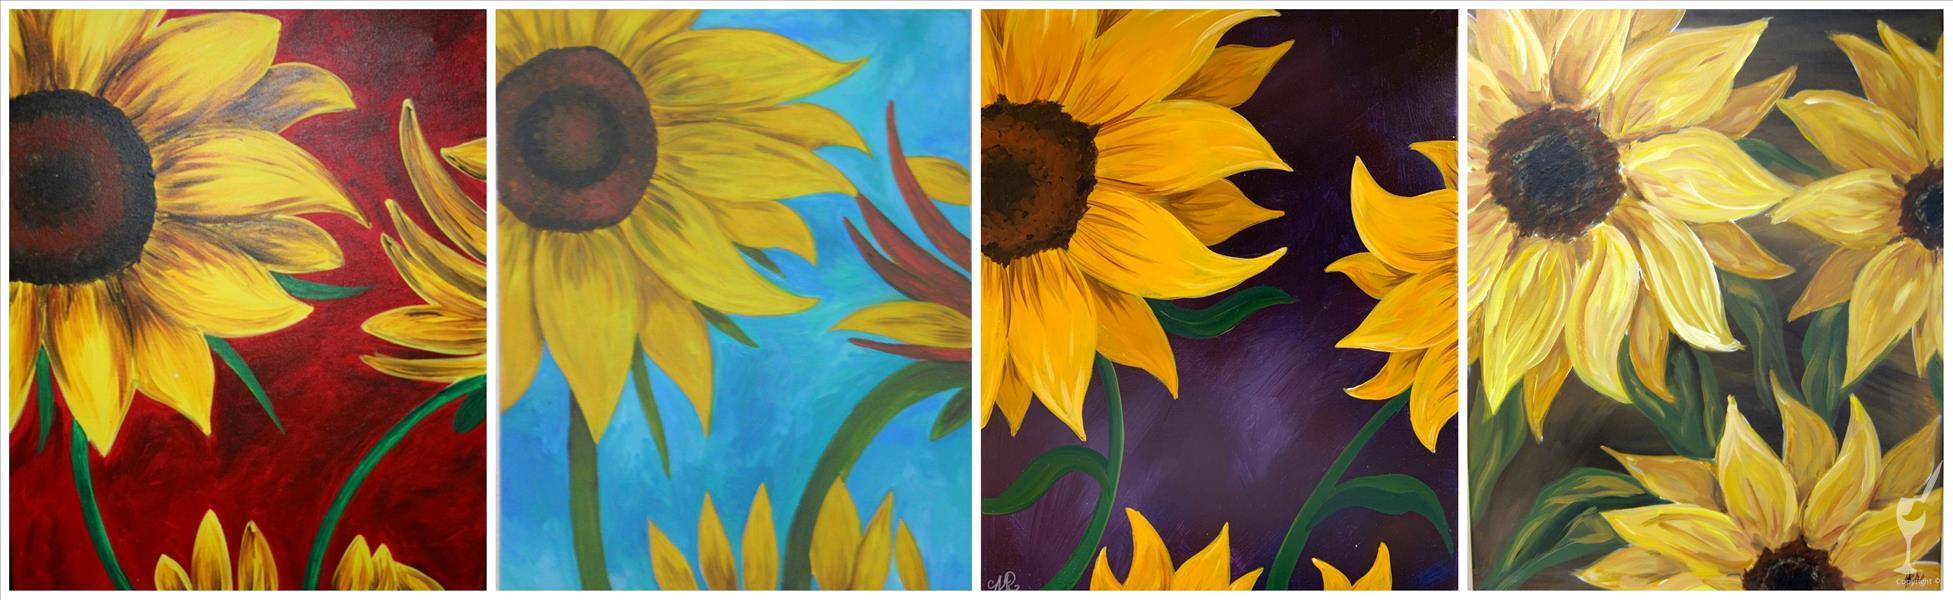 Sunflowers! Choose Your Background Color!